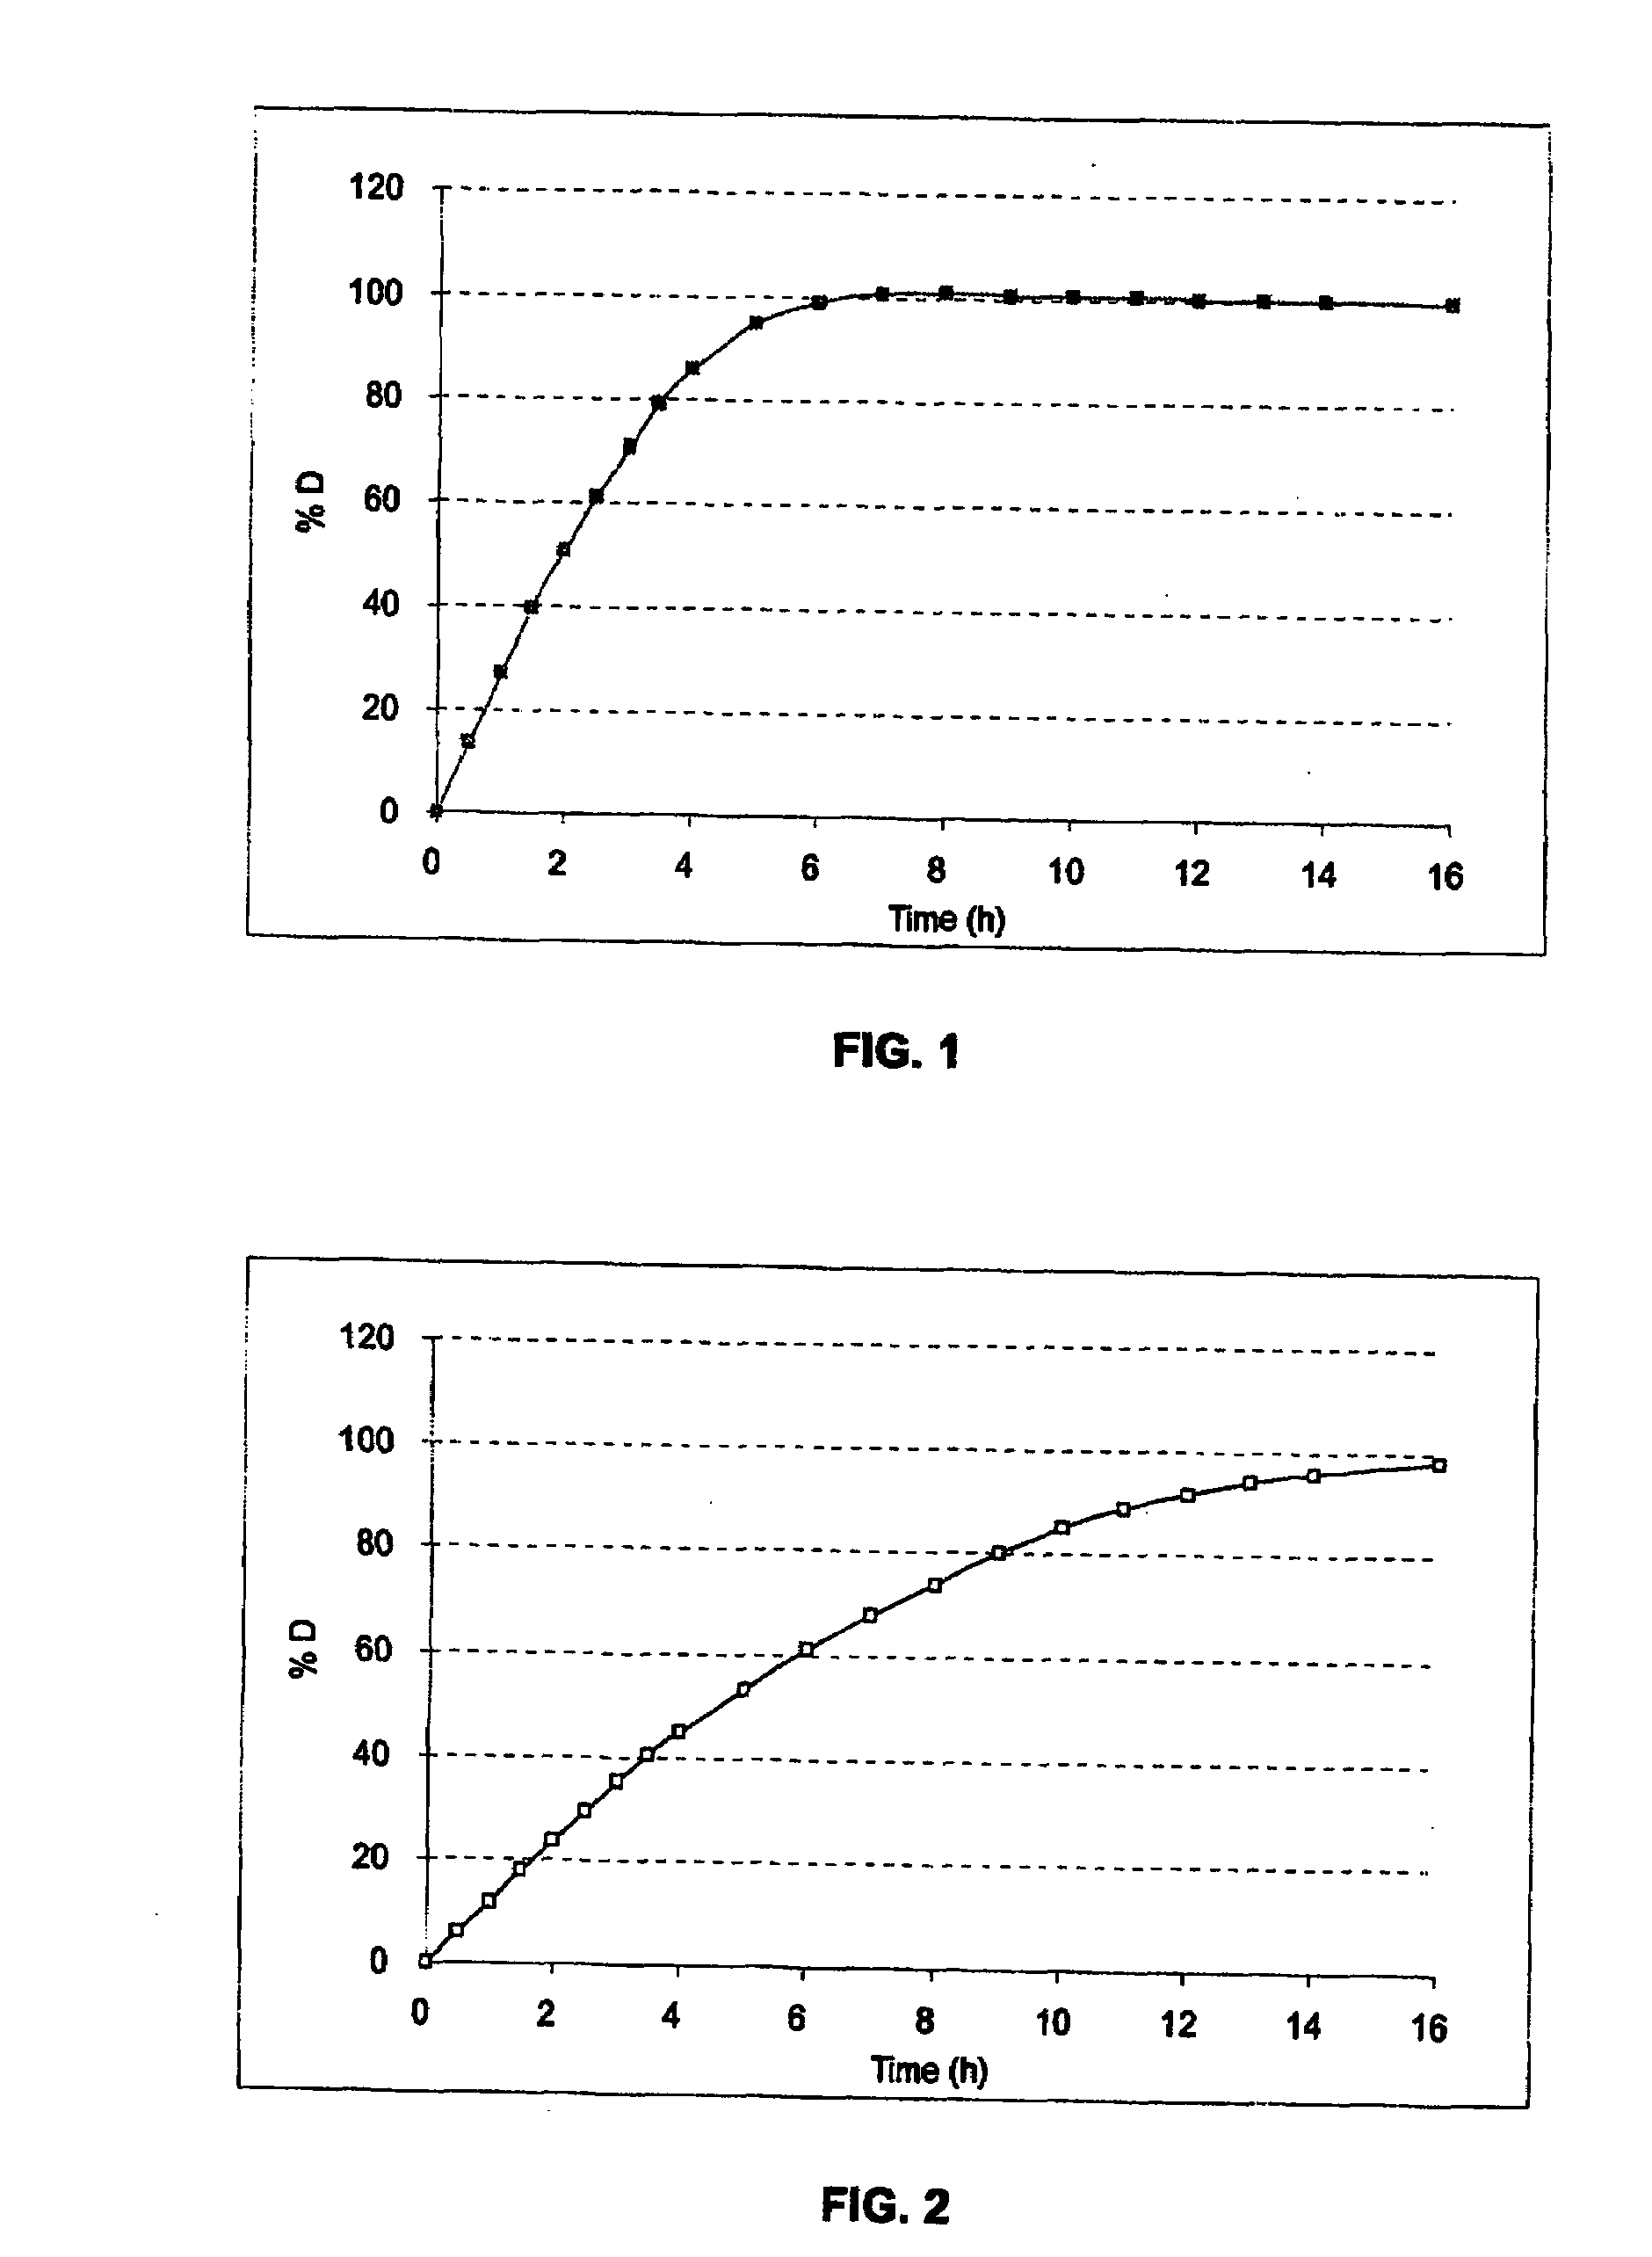 Oral Medicament Based on a Proton Pump Inhibitor